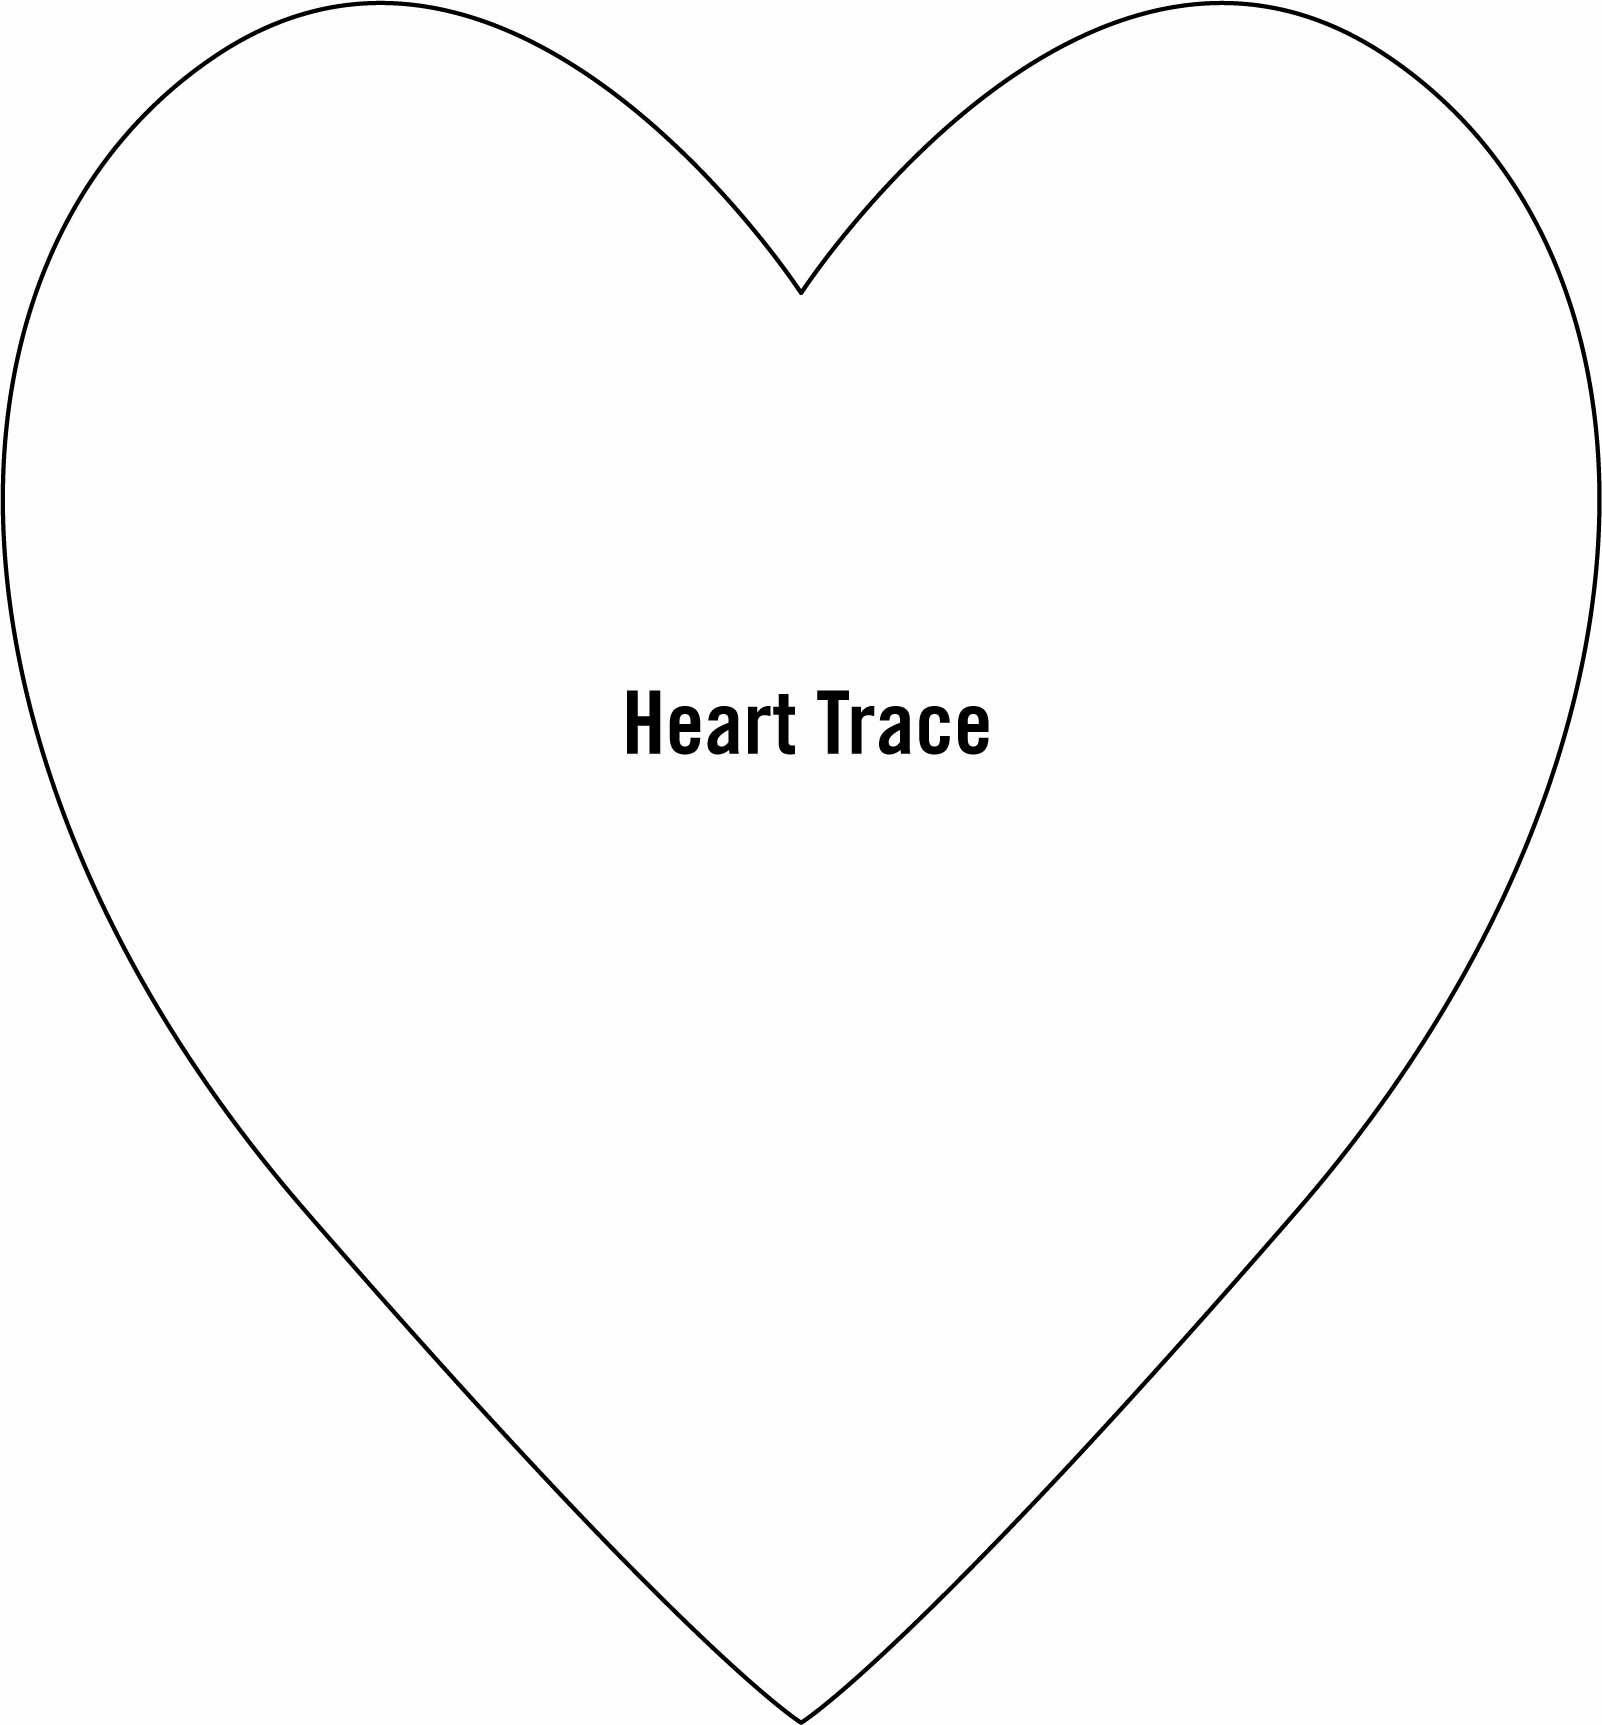 Free Printable Heart Templates (71+ Images In Collection) Page 2 - Free Printable Heart Templates